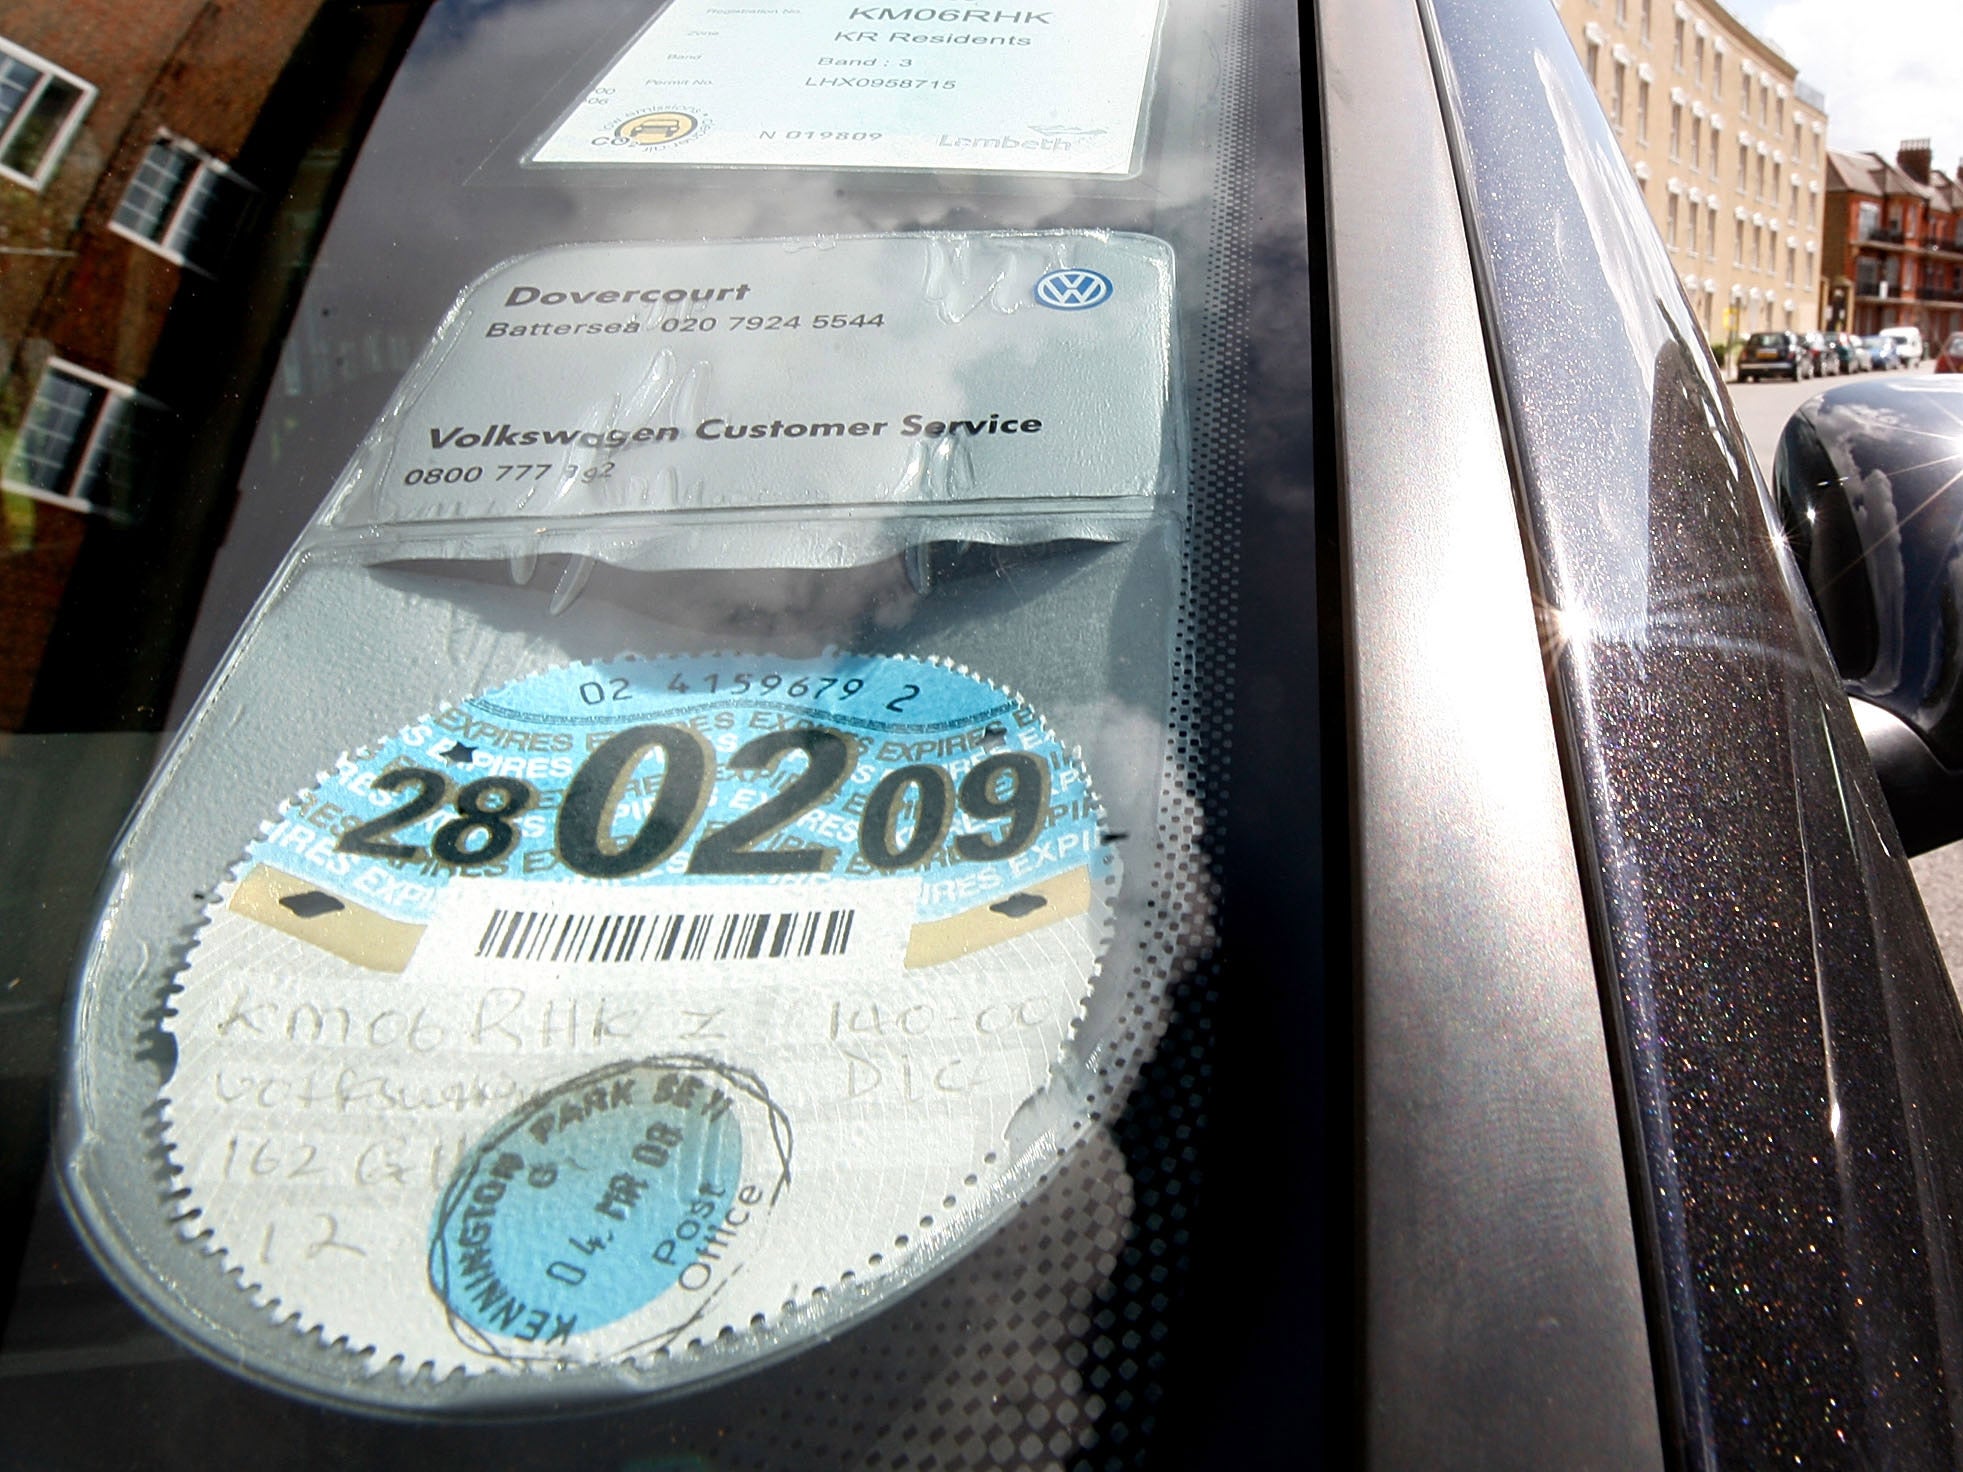 Tax discs RIP - the tax disc was scrapped in favour of a new system of tax that could not be transferred between car owners in October